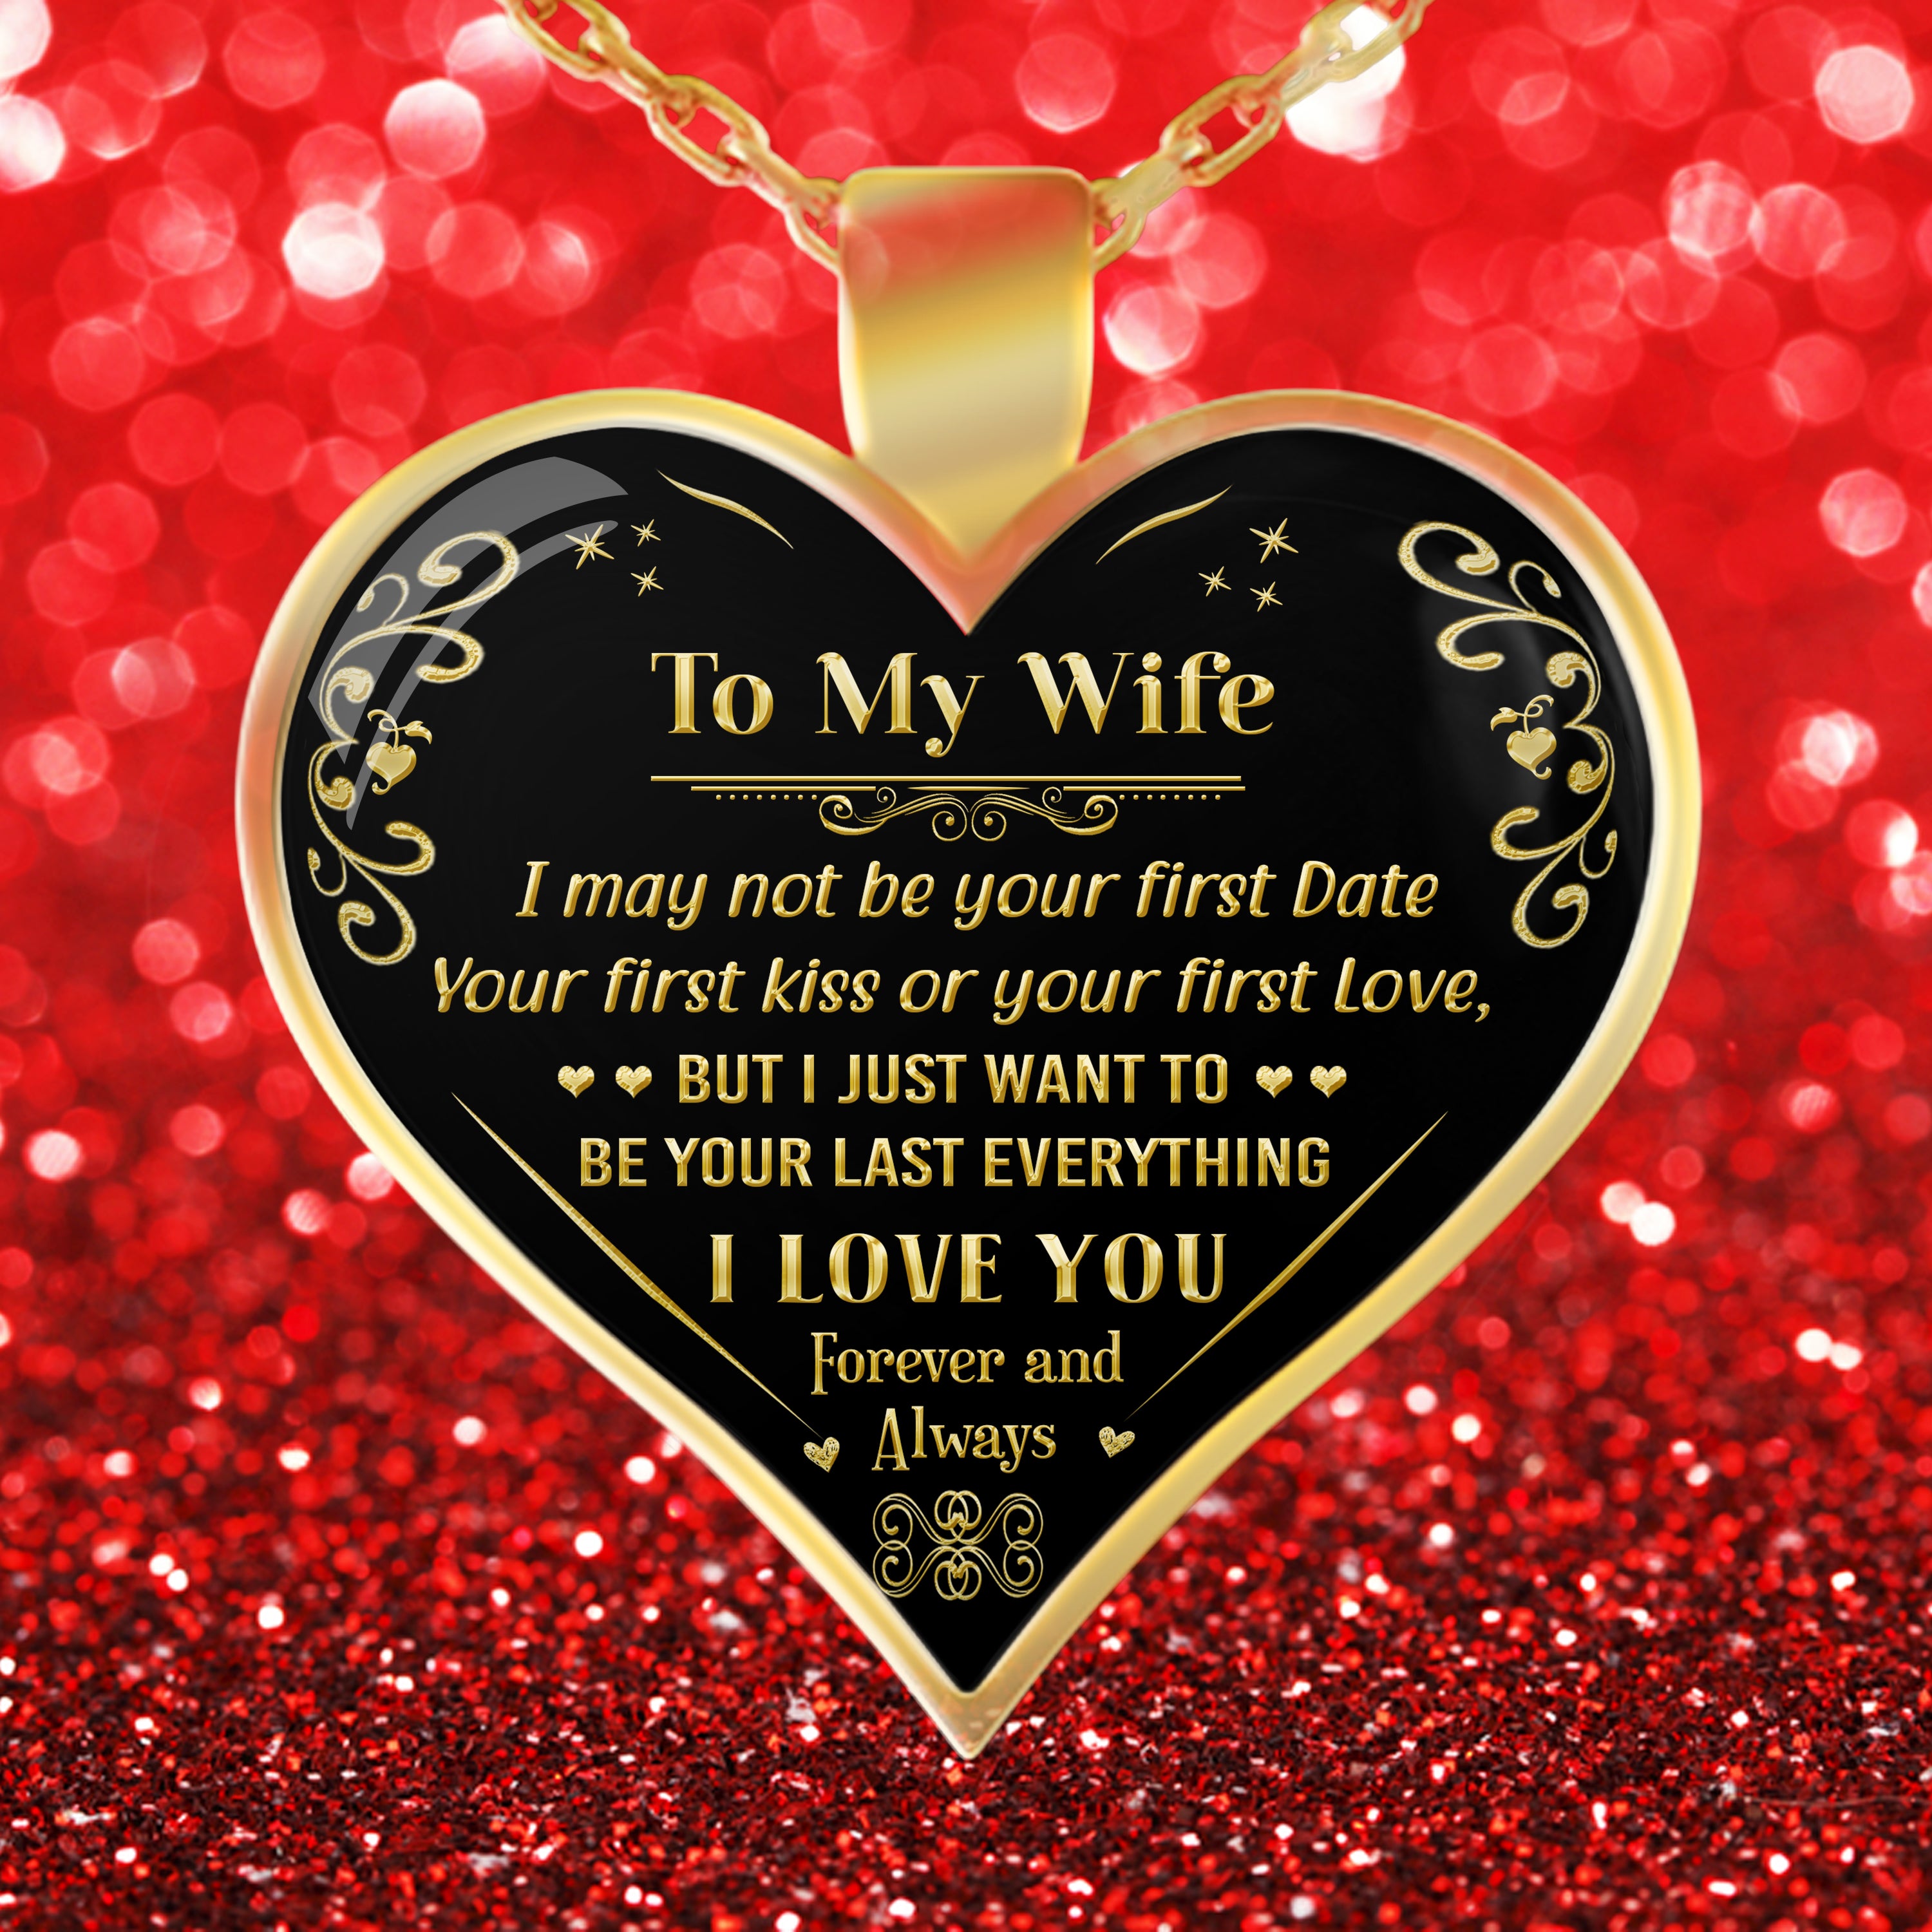 To My Wife - "I Want To Be Your Last Everything" Gold Pendant Necklace